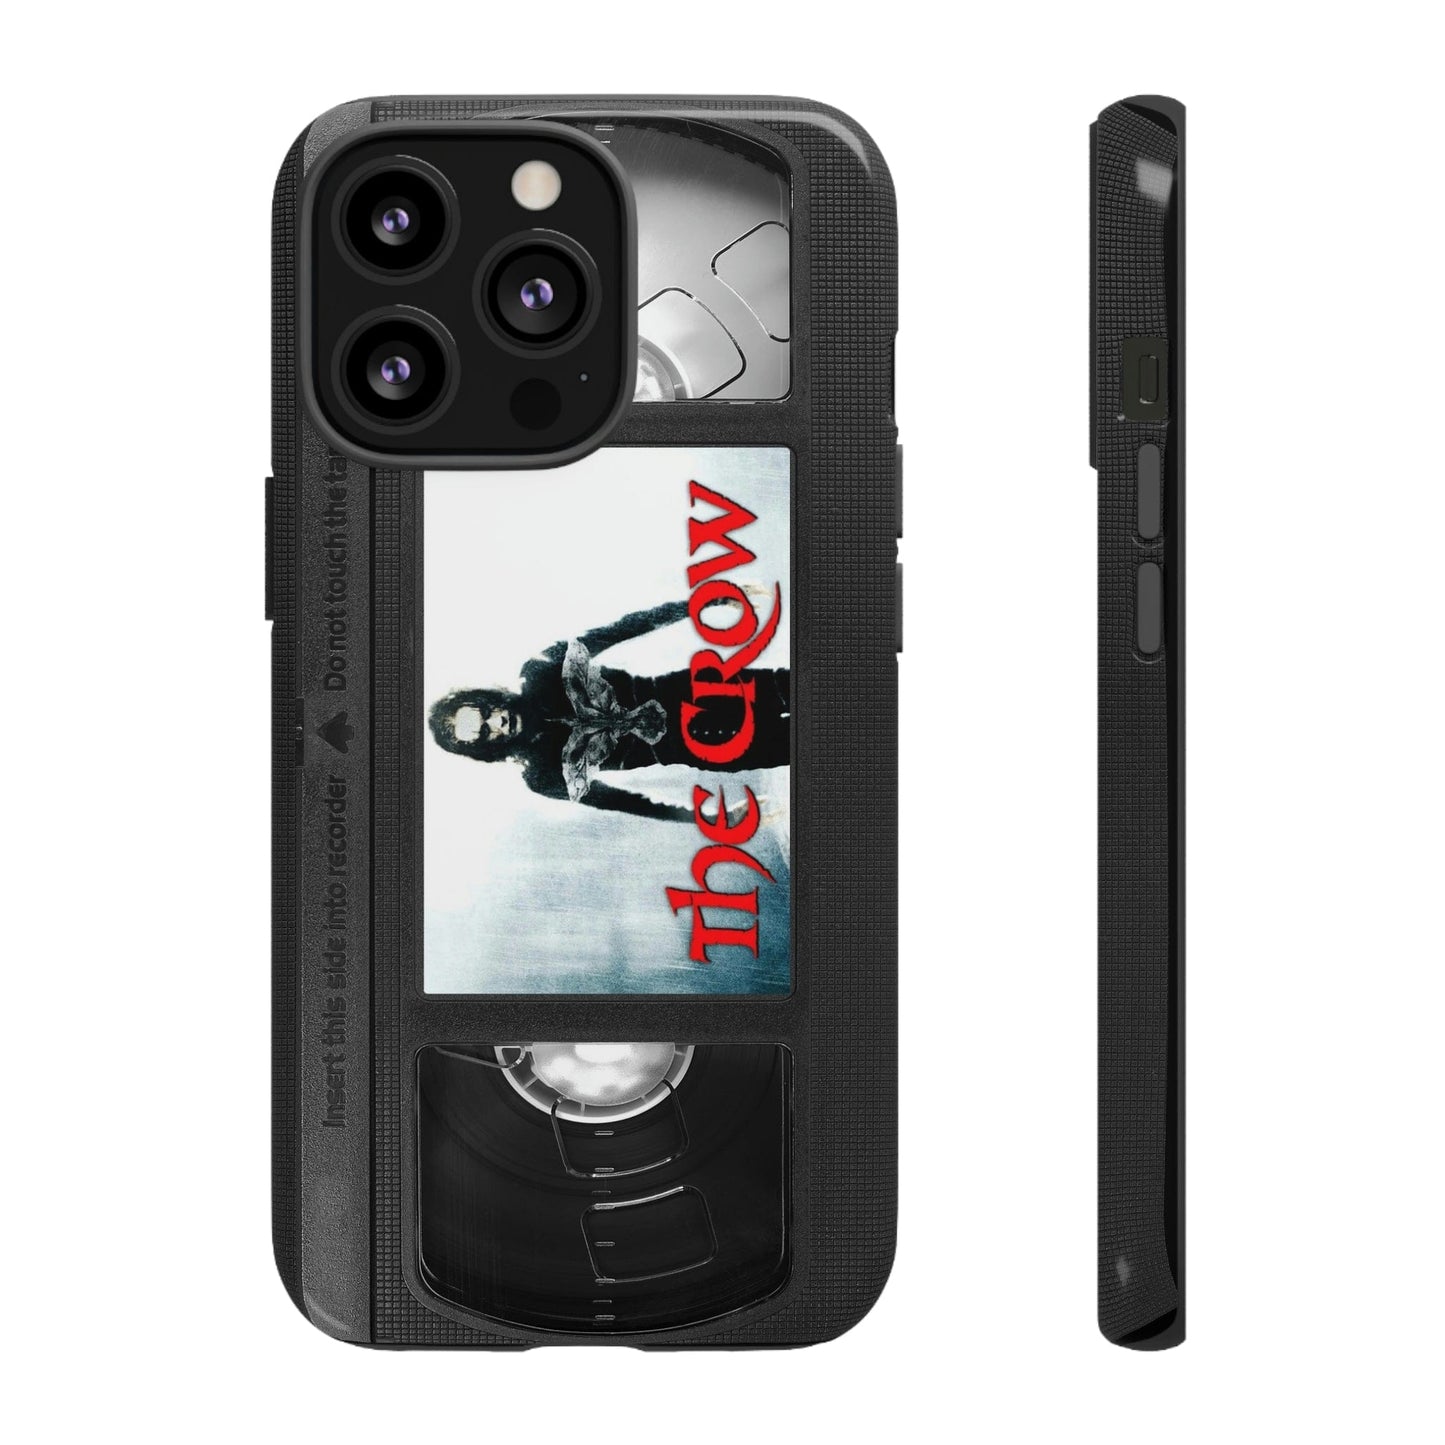 The Crow Impact Resistant VHS Phone Case